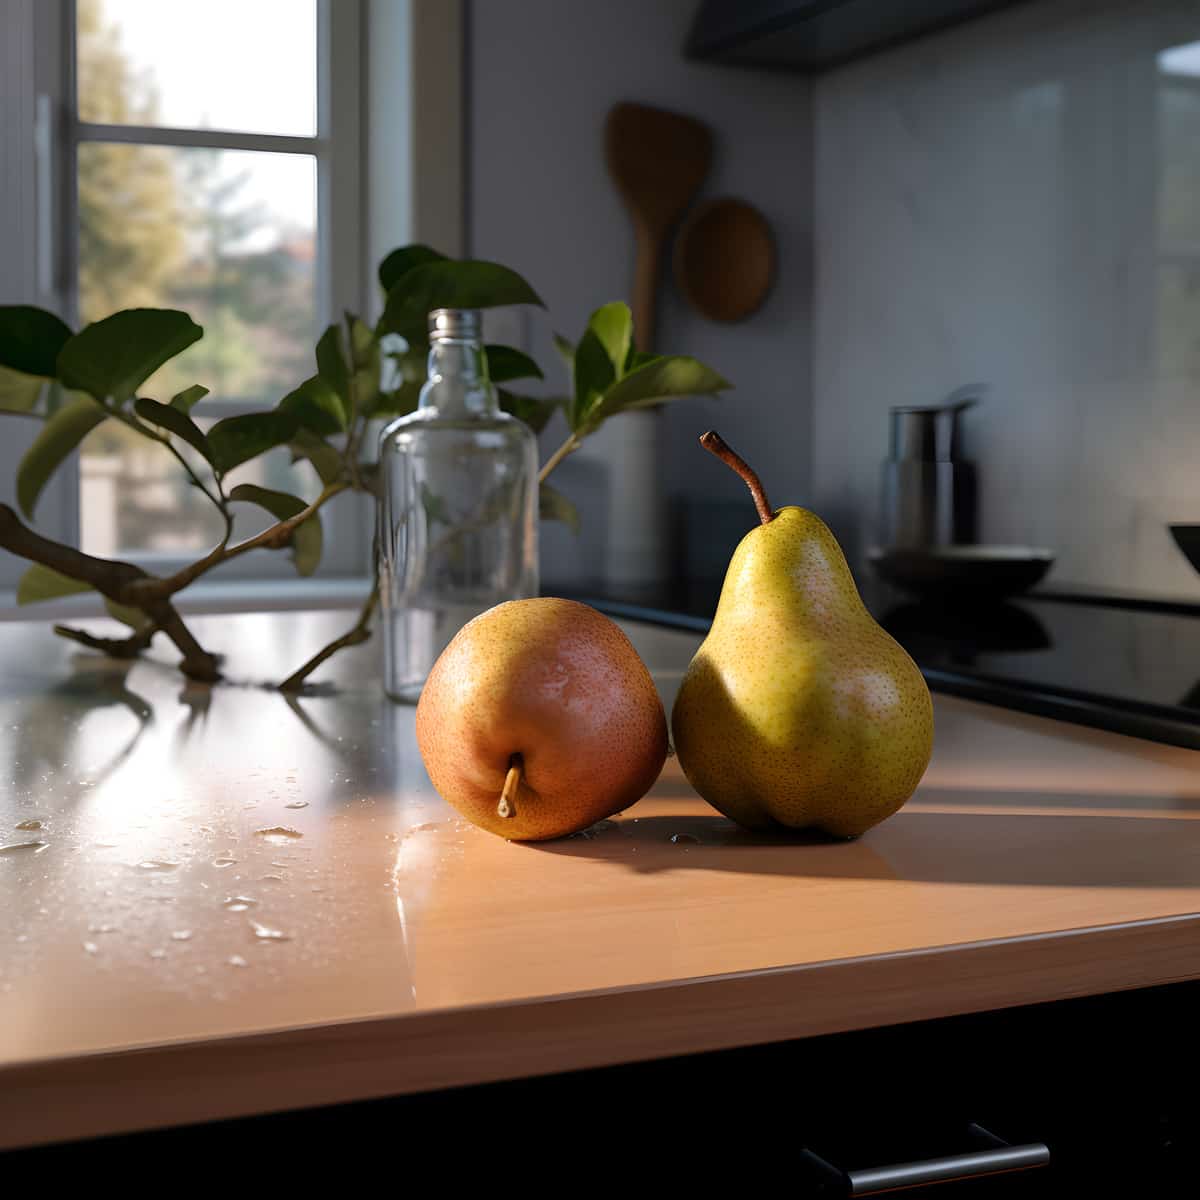 Pyrus Regelii on a kitchen counter